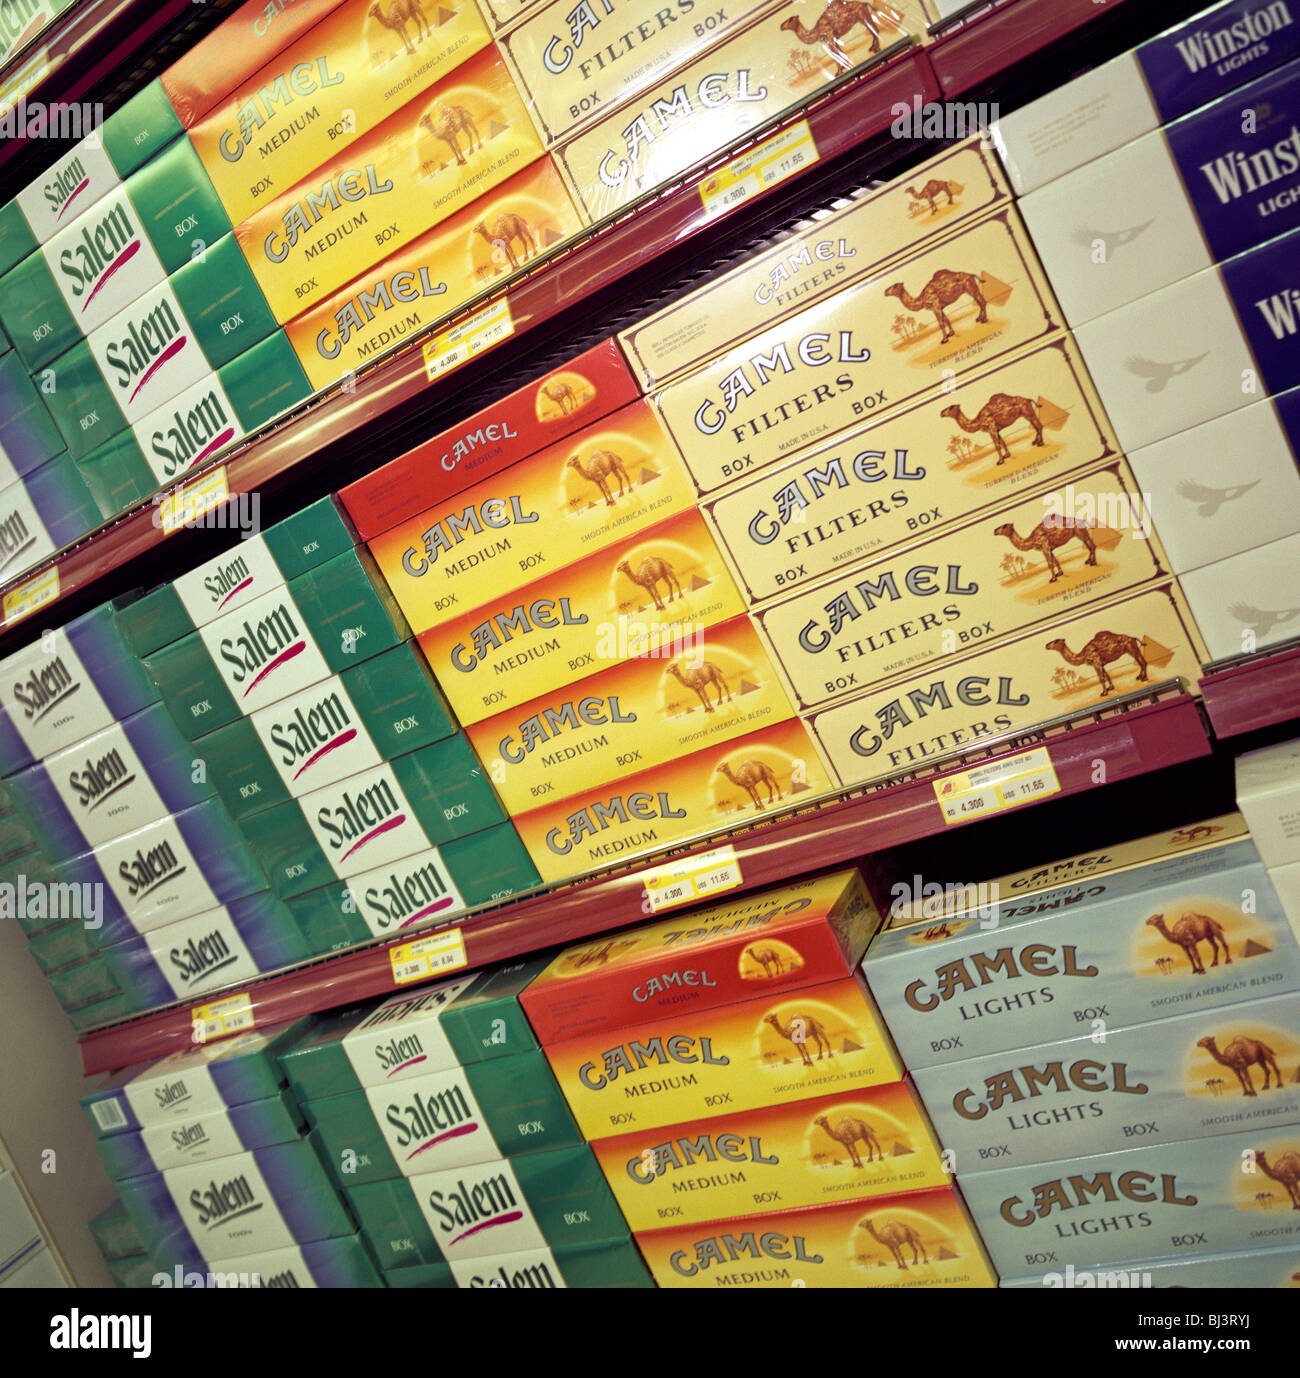 Stacks of cigarette cartons are piled up in a display of duty free goods at Bahrain International airport. Stock Photo